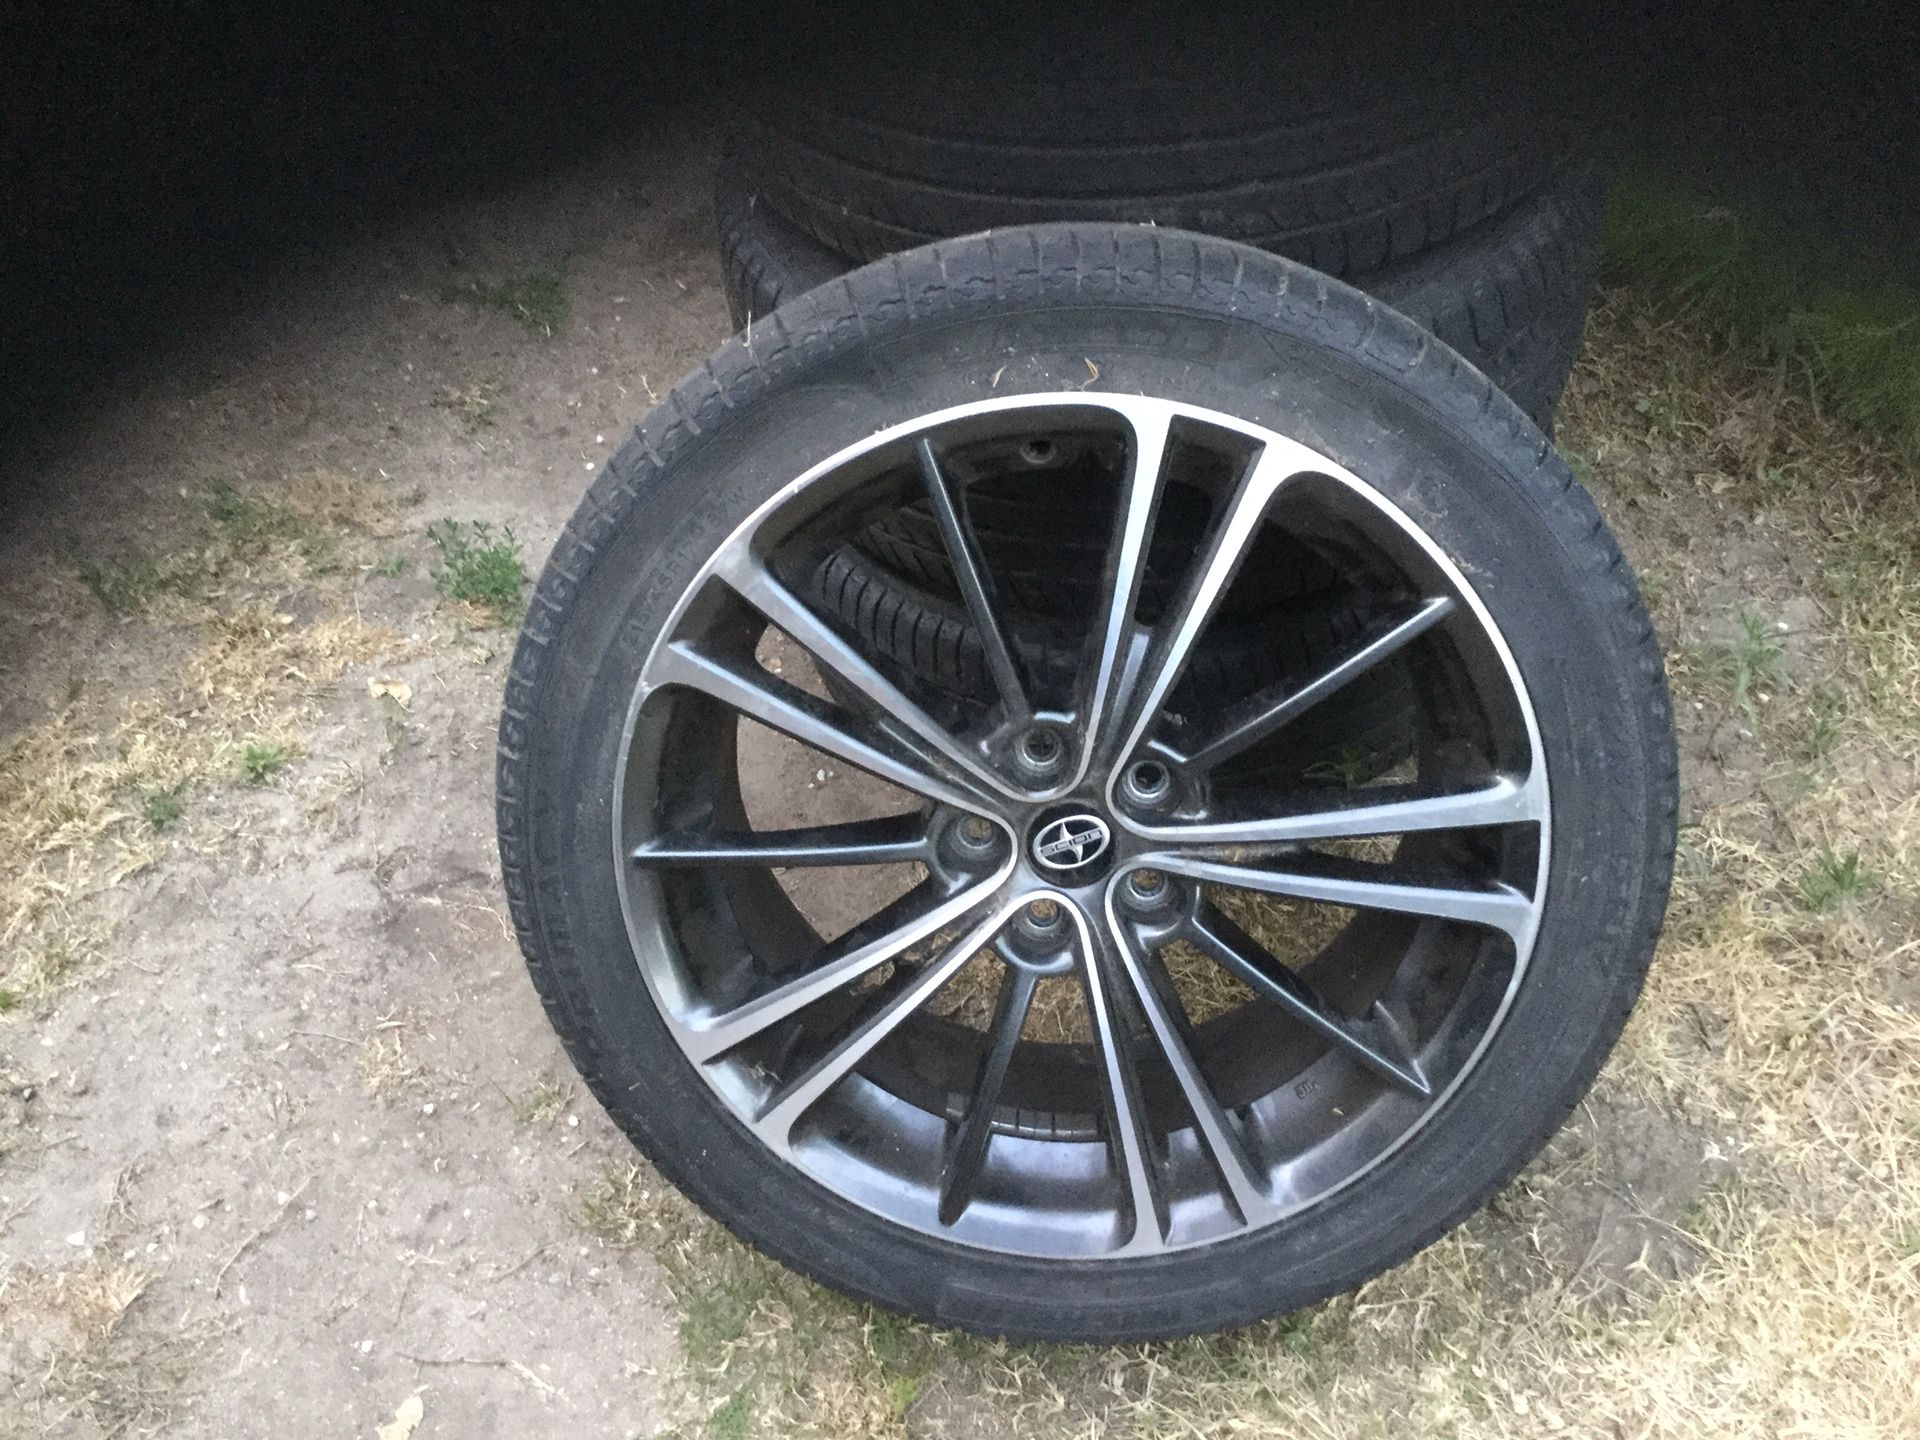 4 2015 Toyota FRS stock rims with tire